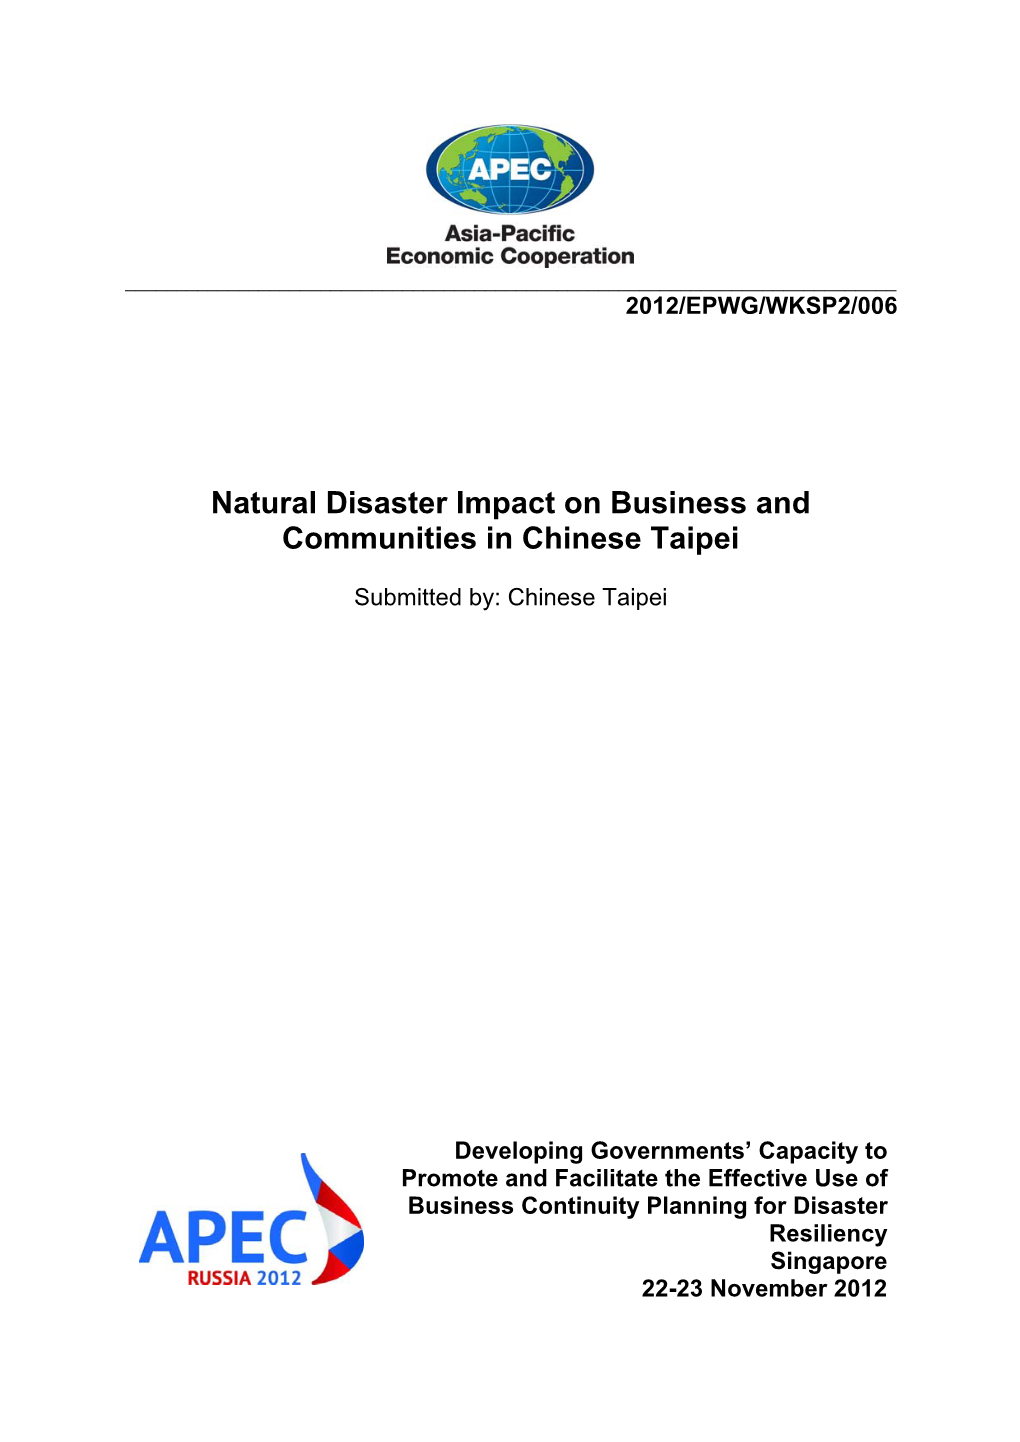 Natural Disaster Impact on Business and Communities in Chinese Taipei